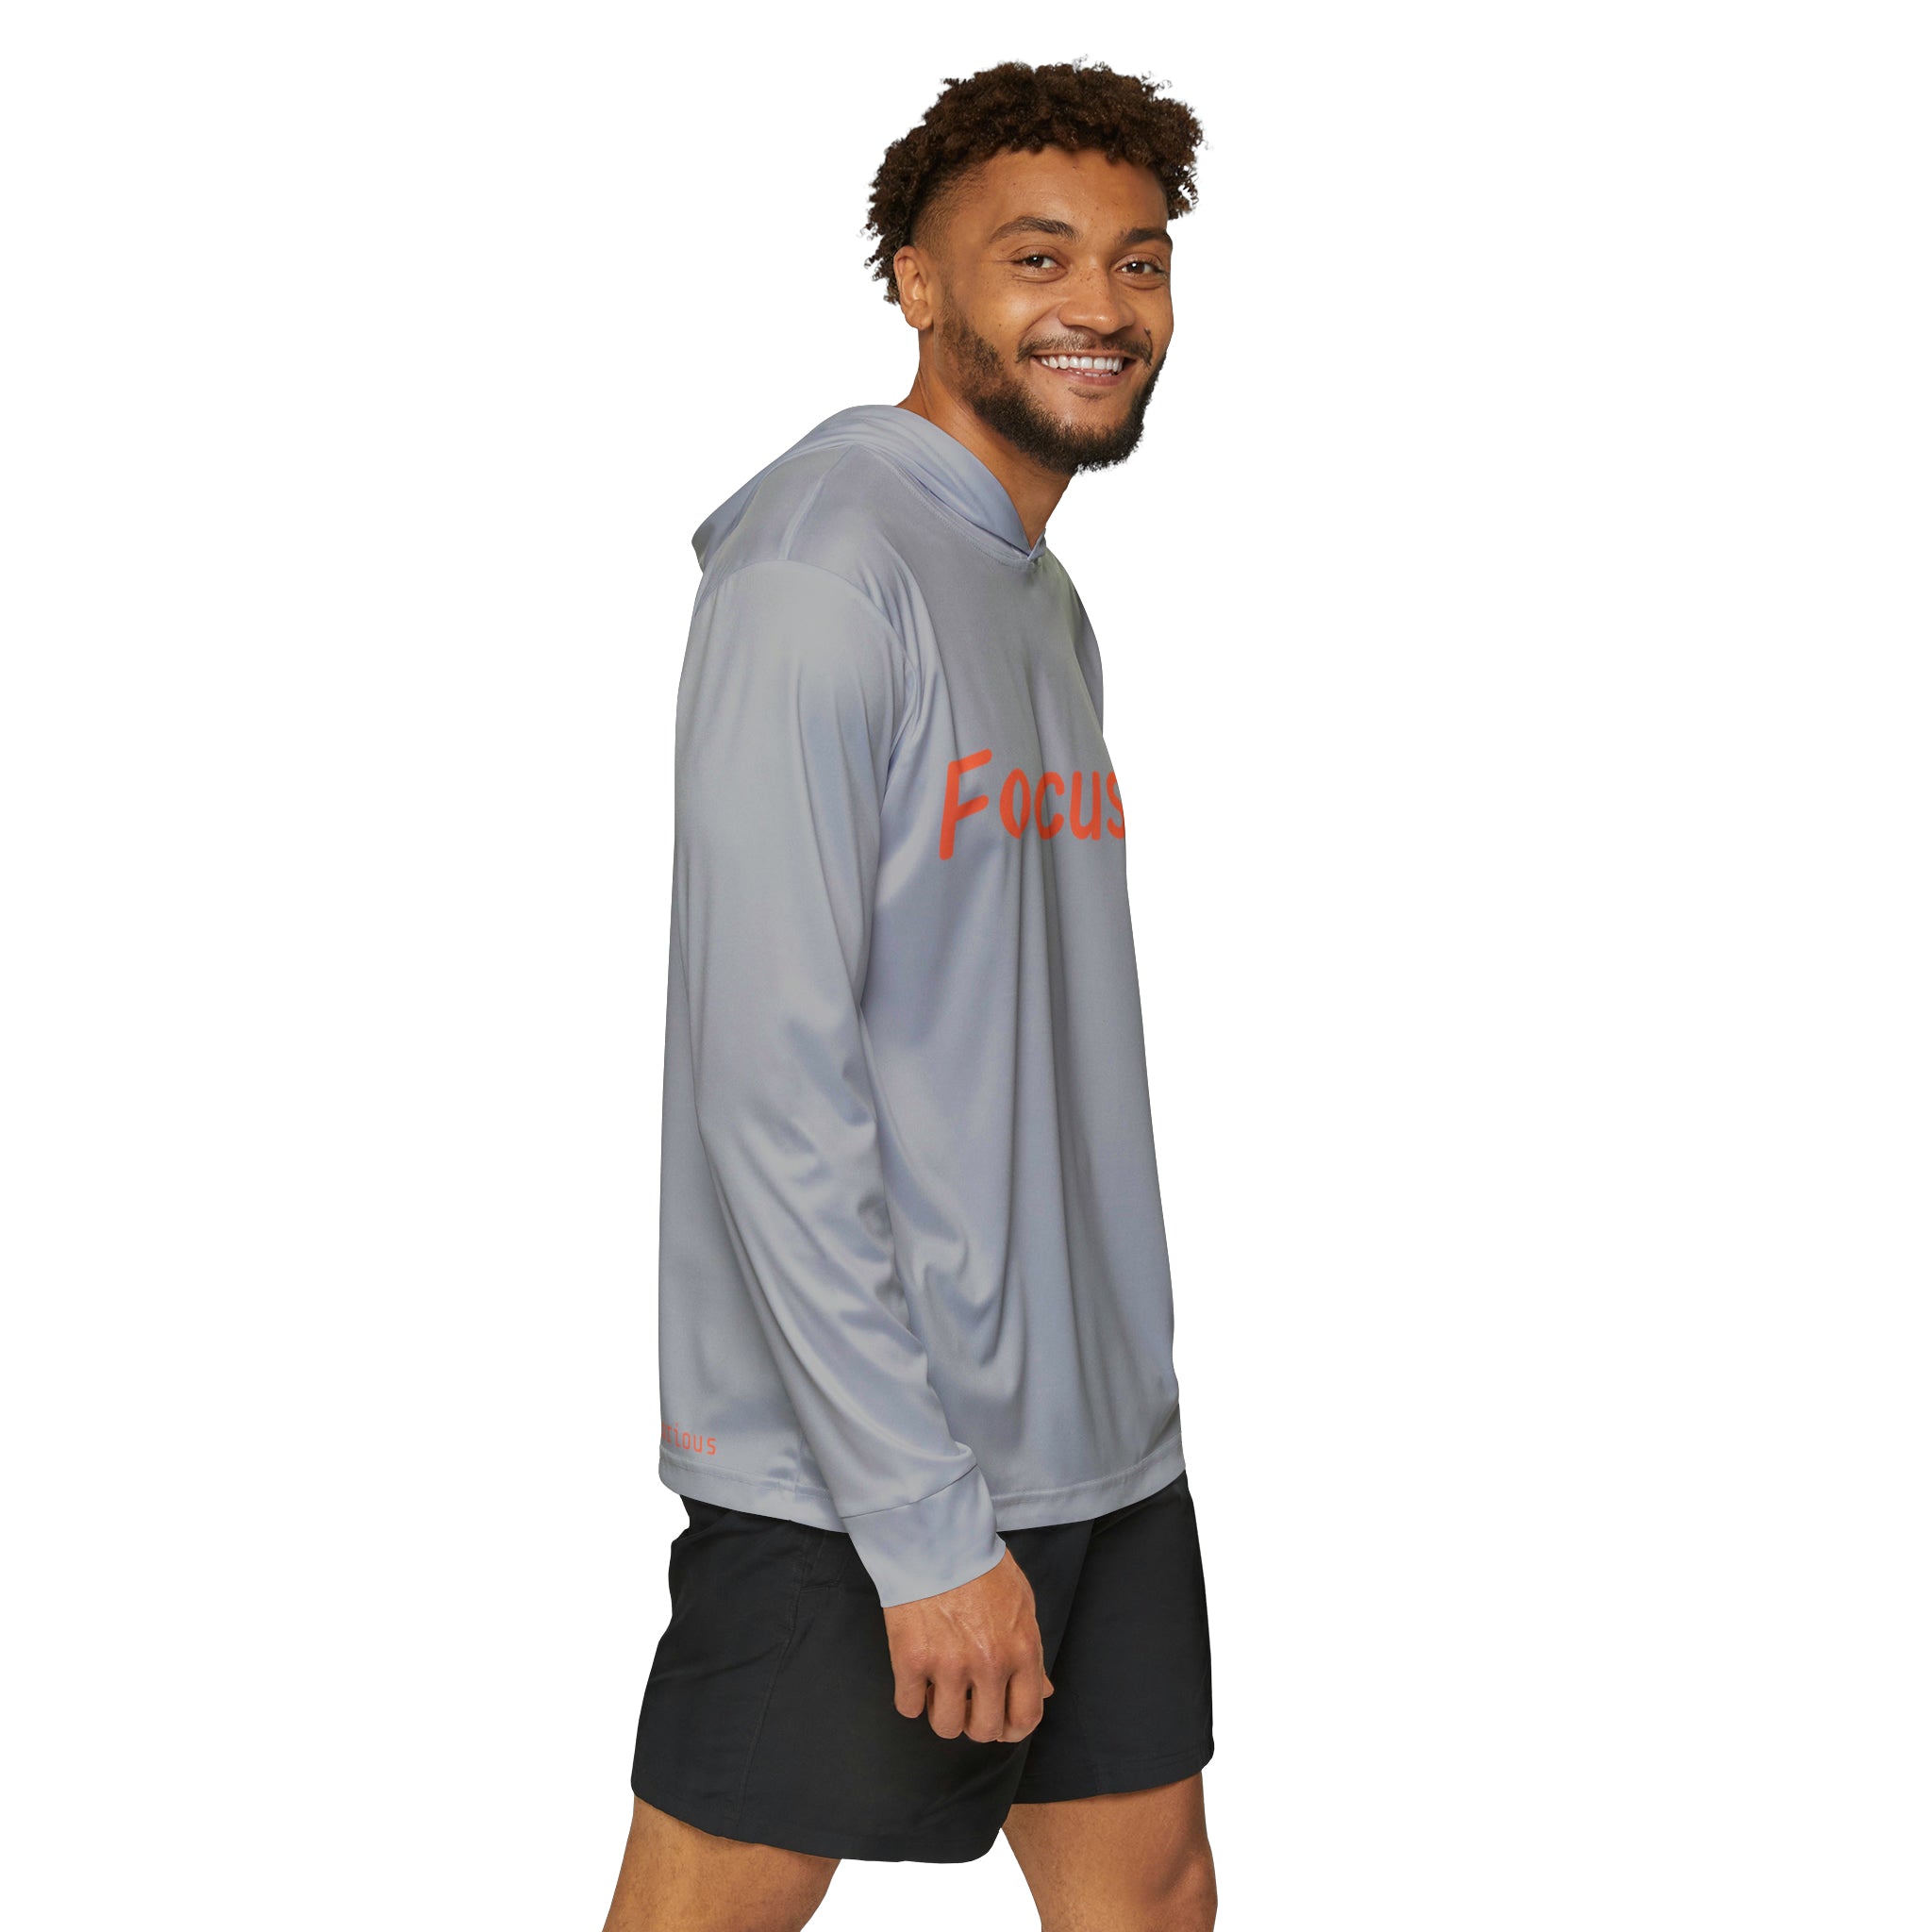 Focused Men's Sports Warmup Hoodie: Stay on Target Activewear Durable Fabric Made in USA Men's Hoodie Mental Health Support Moisture-wicking Performance Apparel Quality Control Sports Warmup UPF 50+ All Over Prints 4707196213125953518_2048 Printify